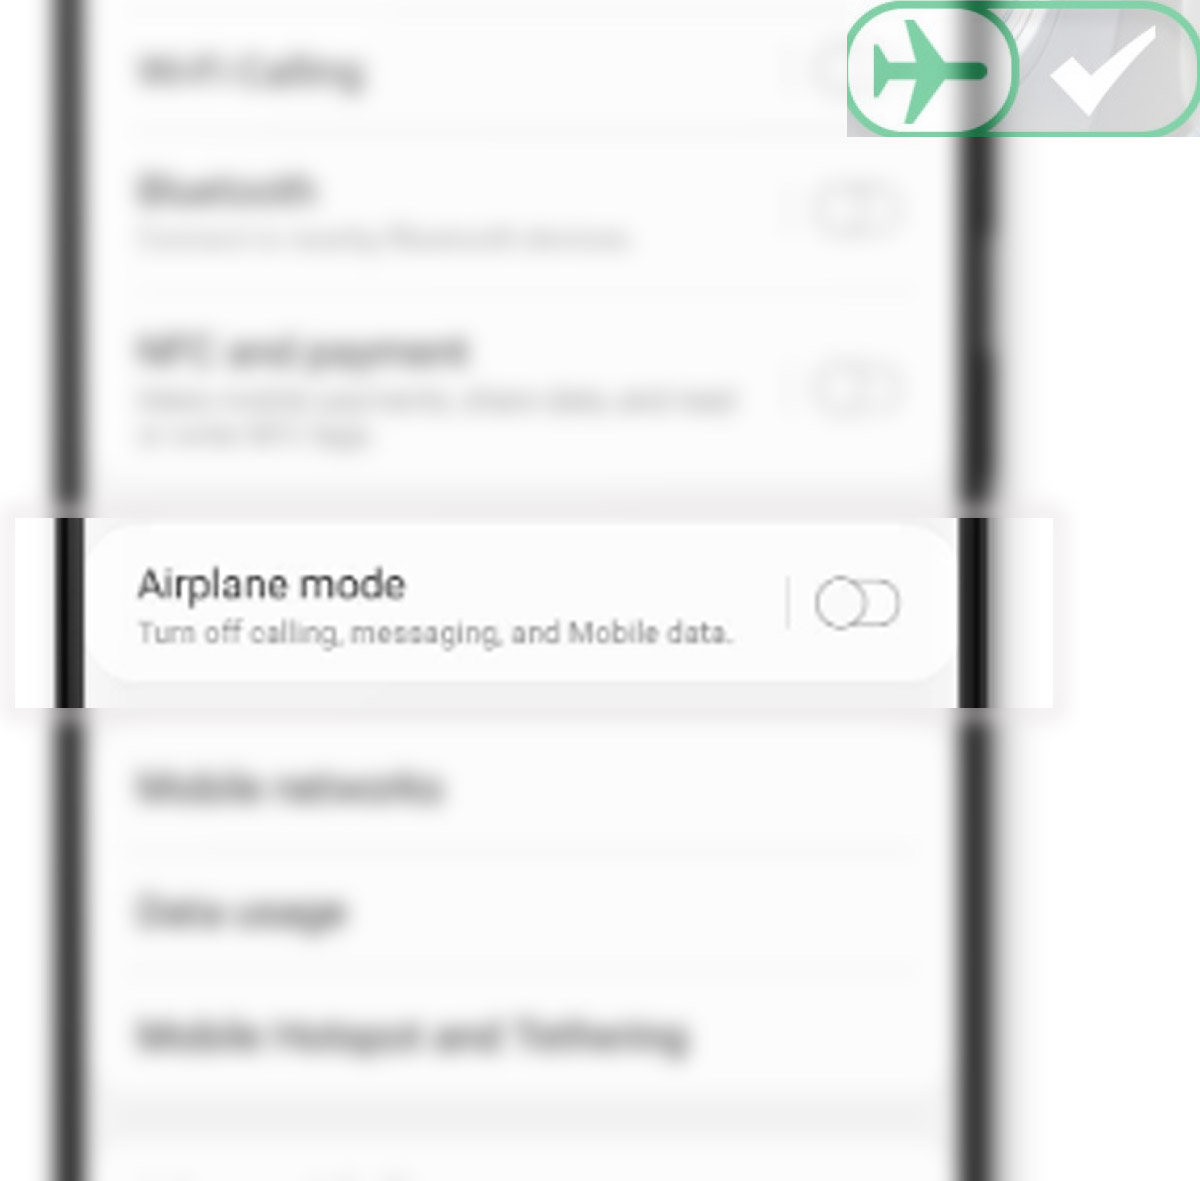 fix galaxy s20 overheating problem - enable airplane mode